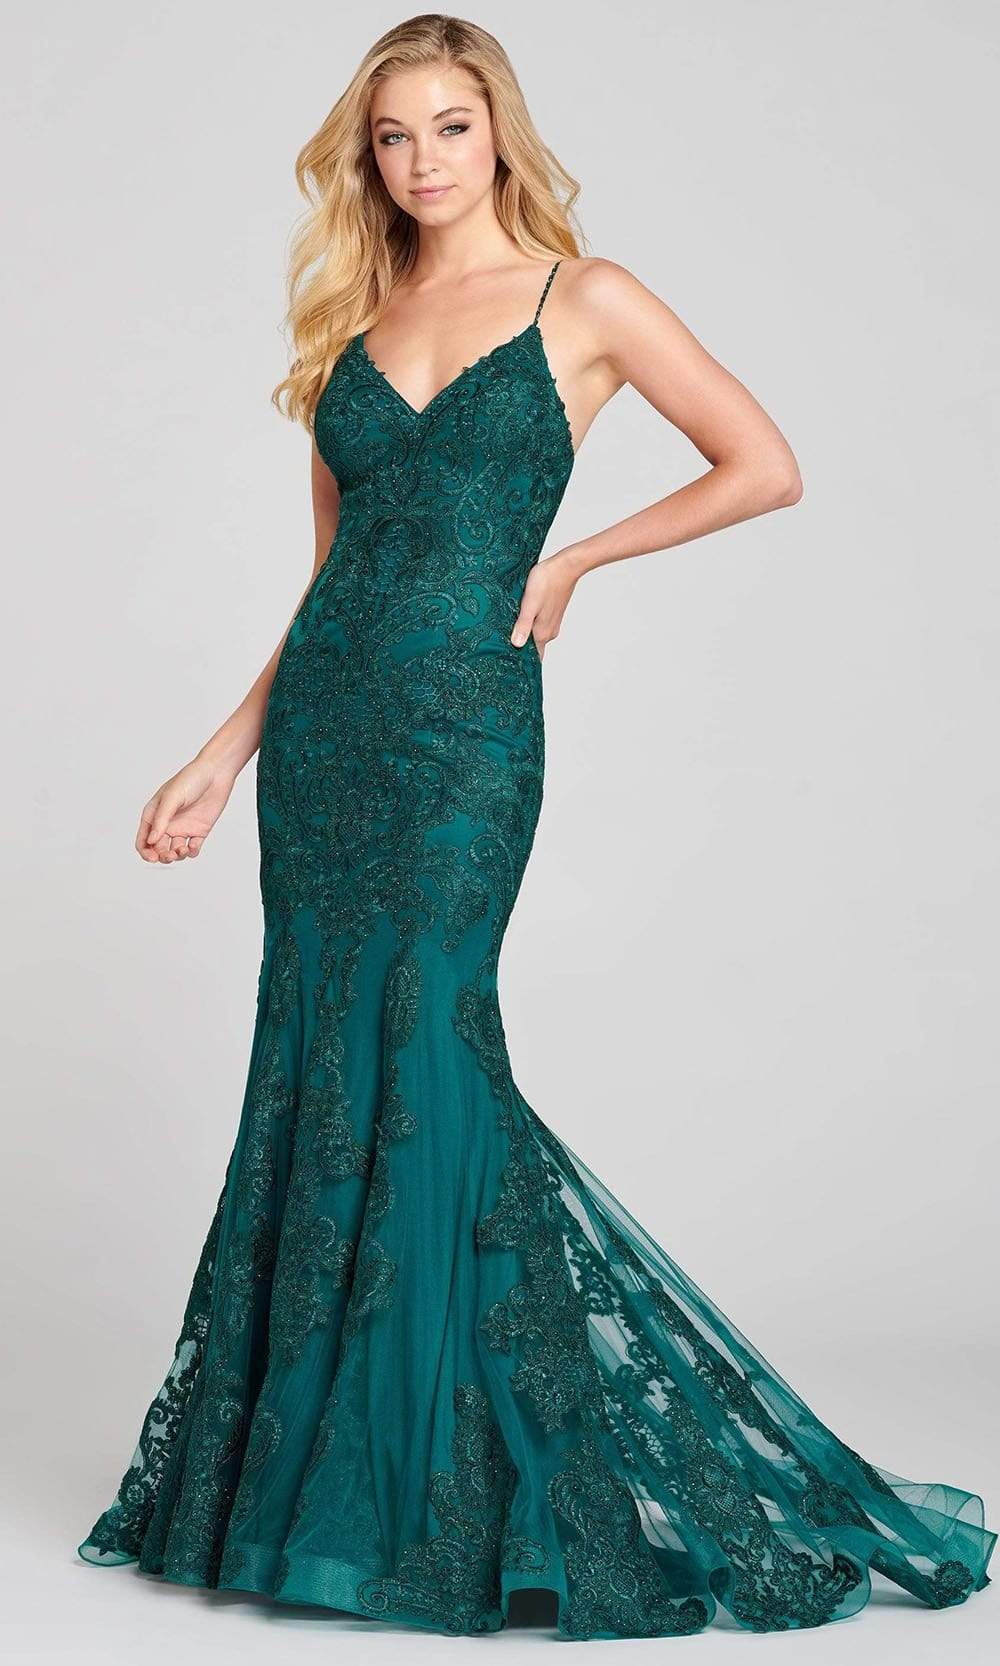 Colette for Mon Cheri - CL12128 Embroidered Applique Mermaid Gown
